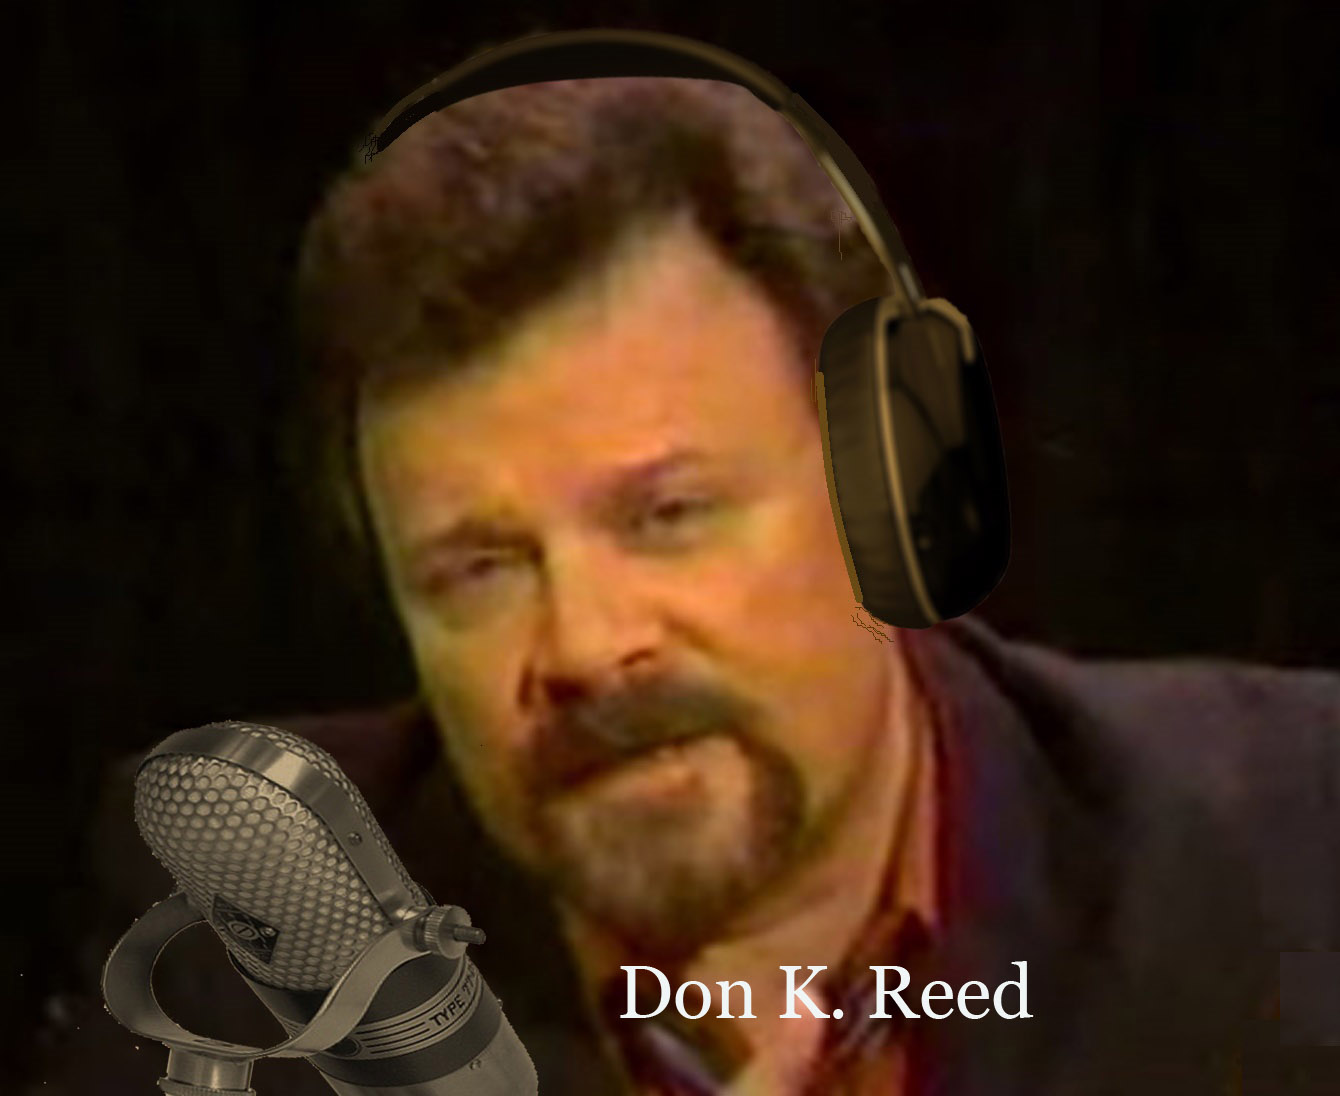 Art for Don K. Reed by Radio personality